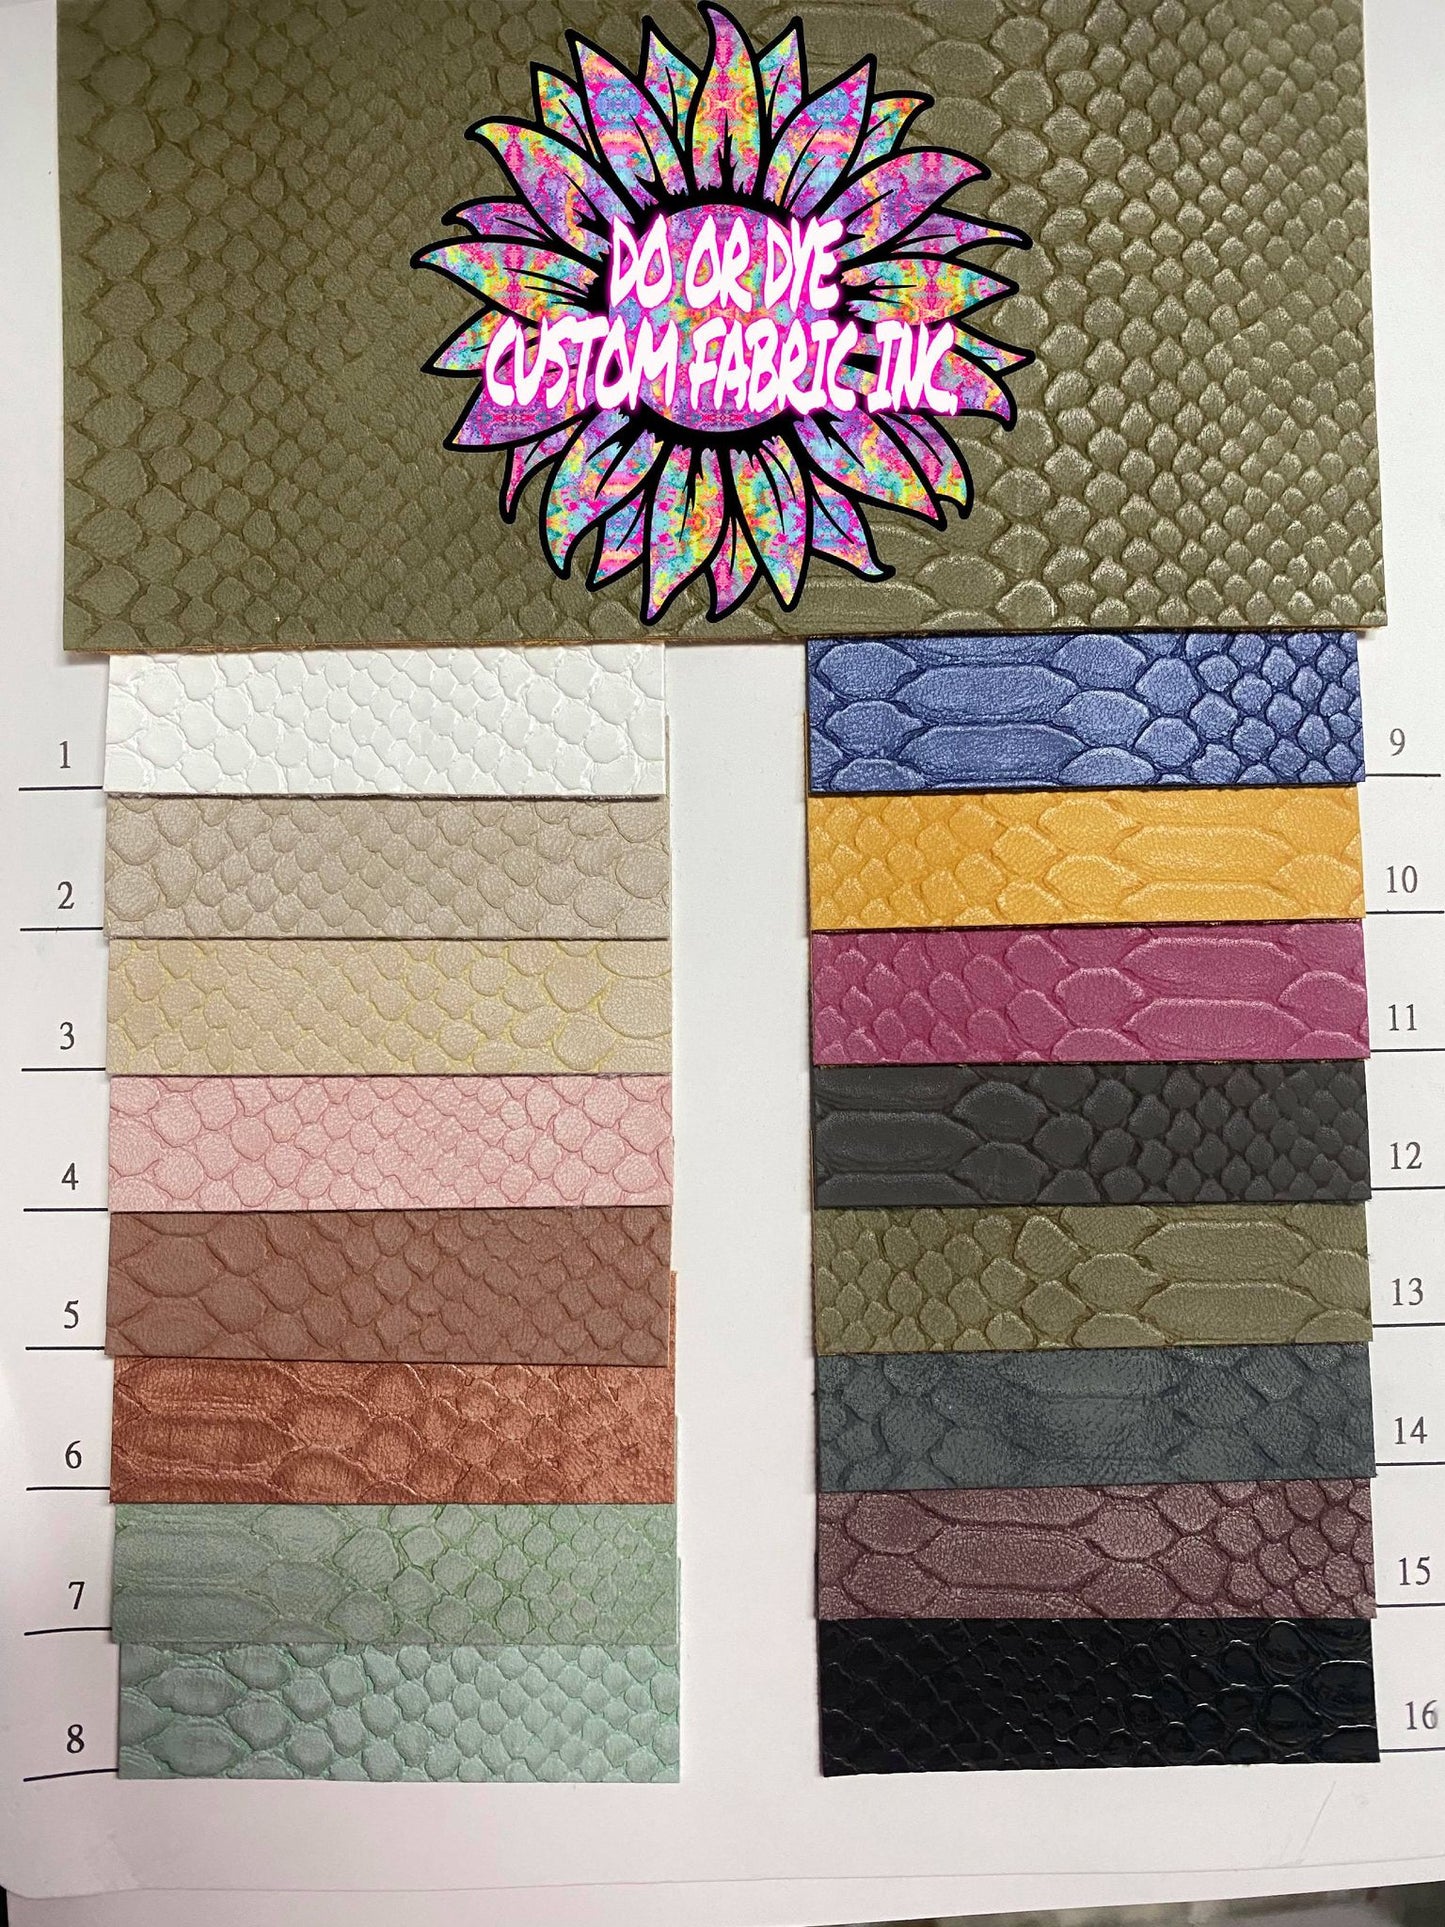 RETAIL Solid Soft Suede Reptile Faux Leather .7mm Soft Back